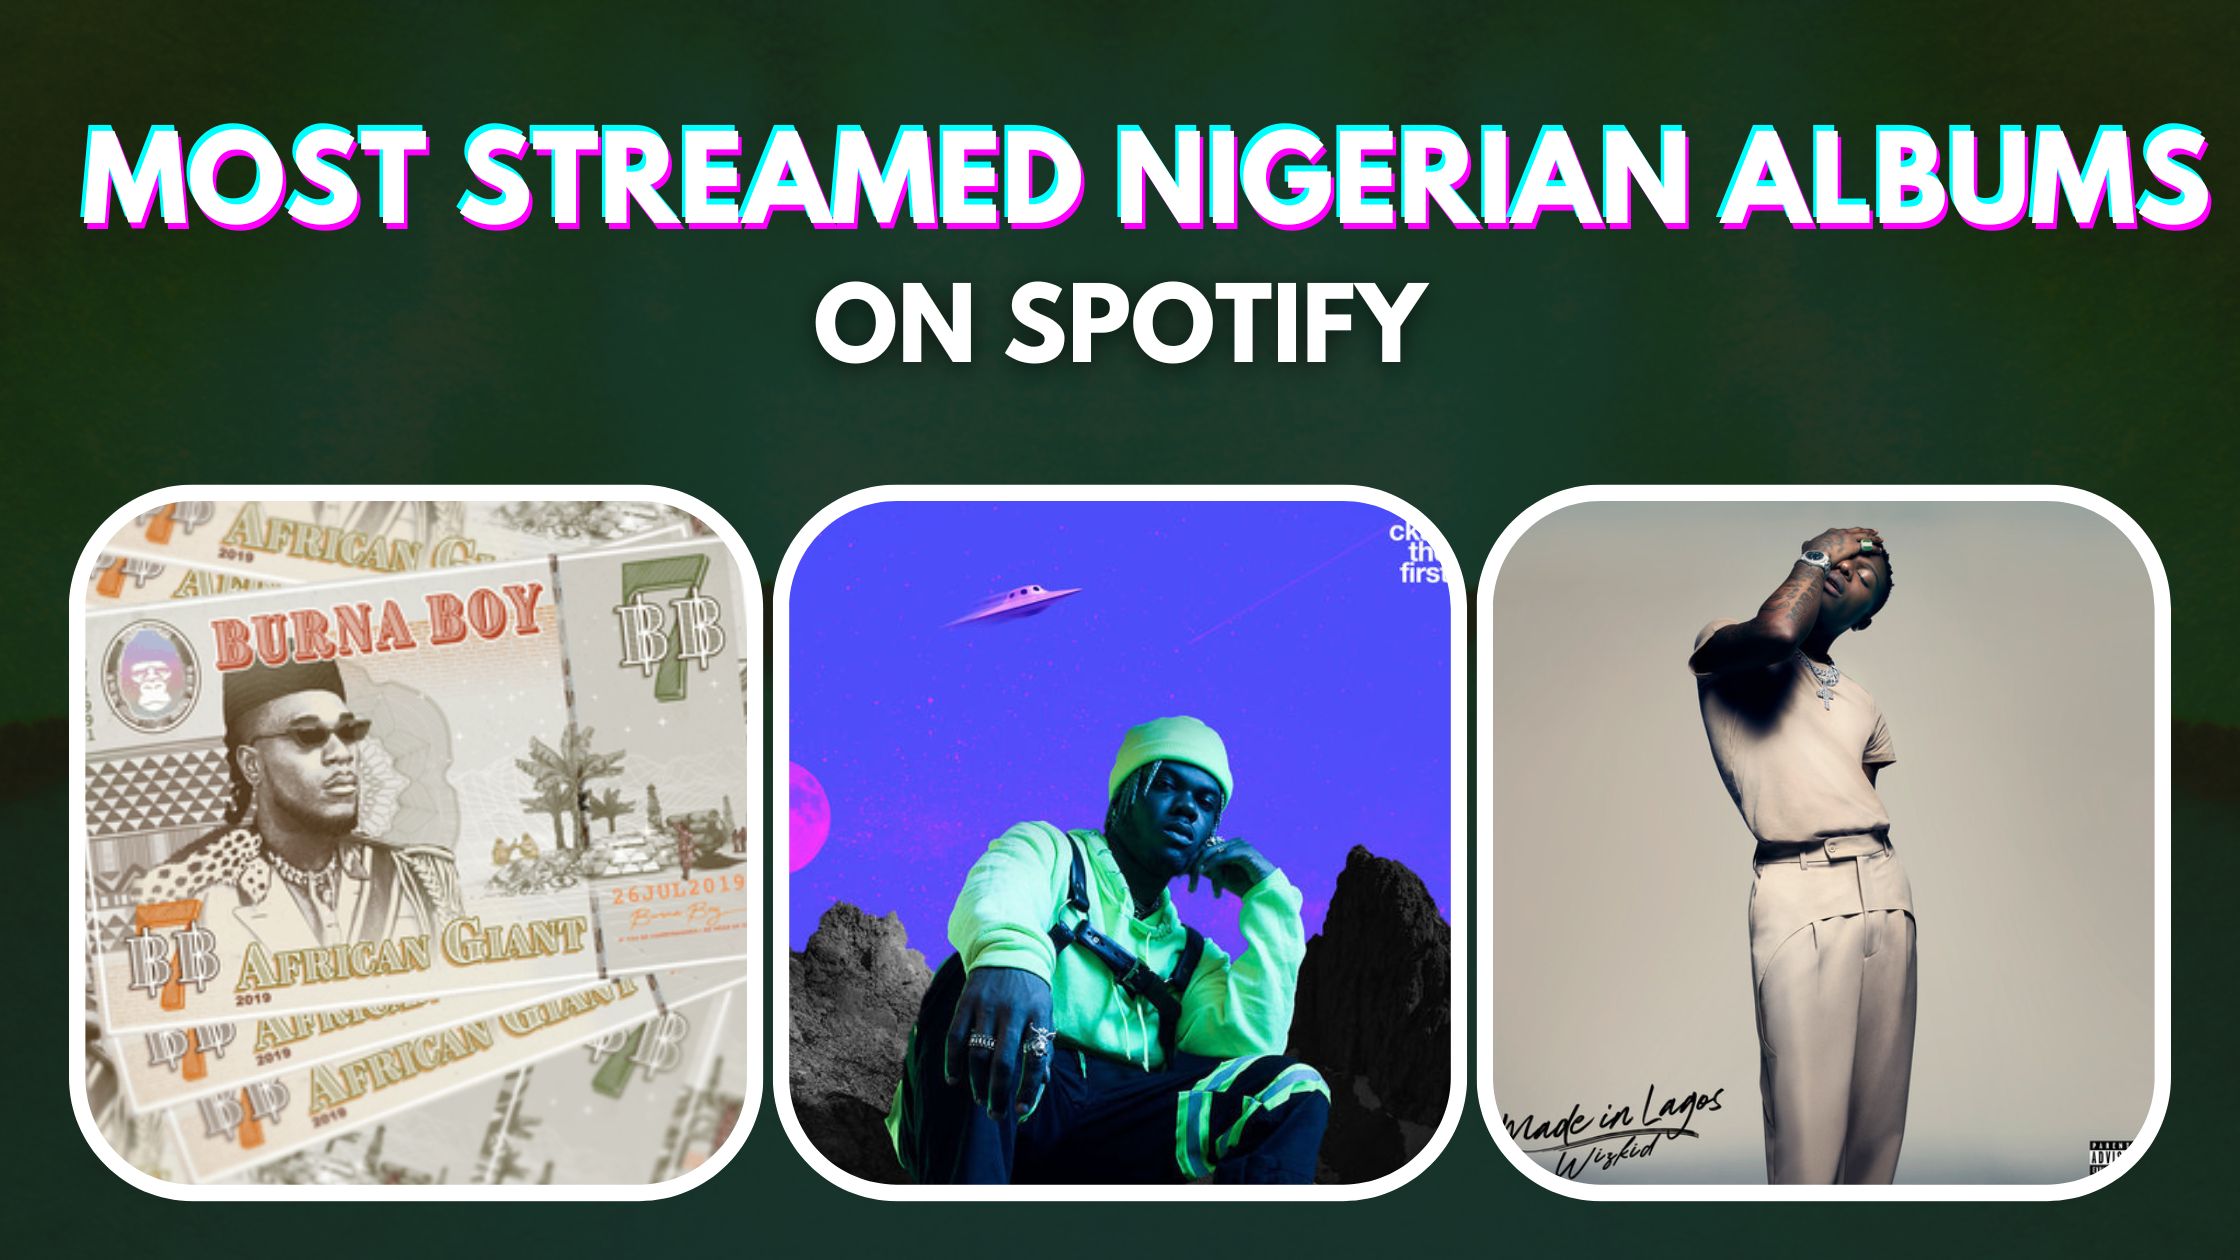 Top 10 Most Streamed Nigerian Albums on Spotify